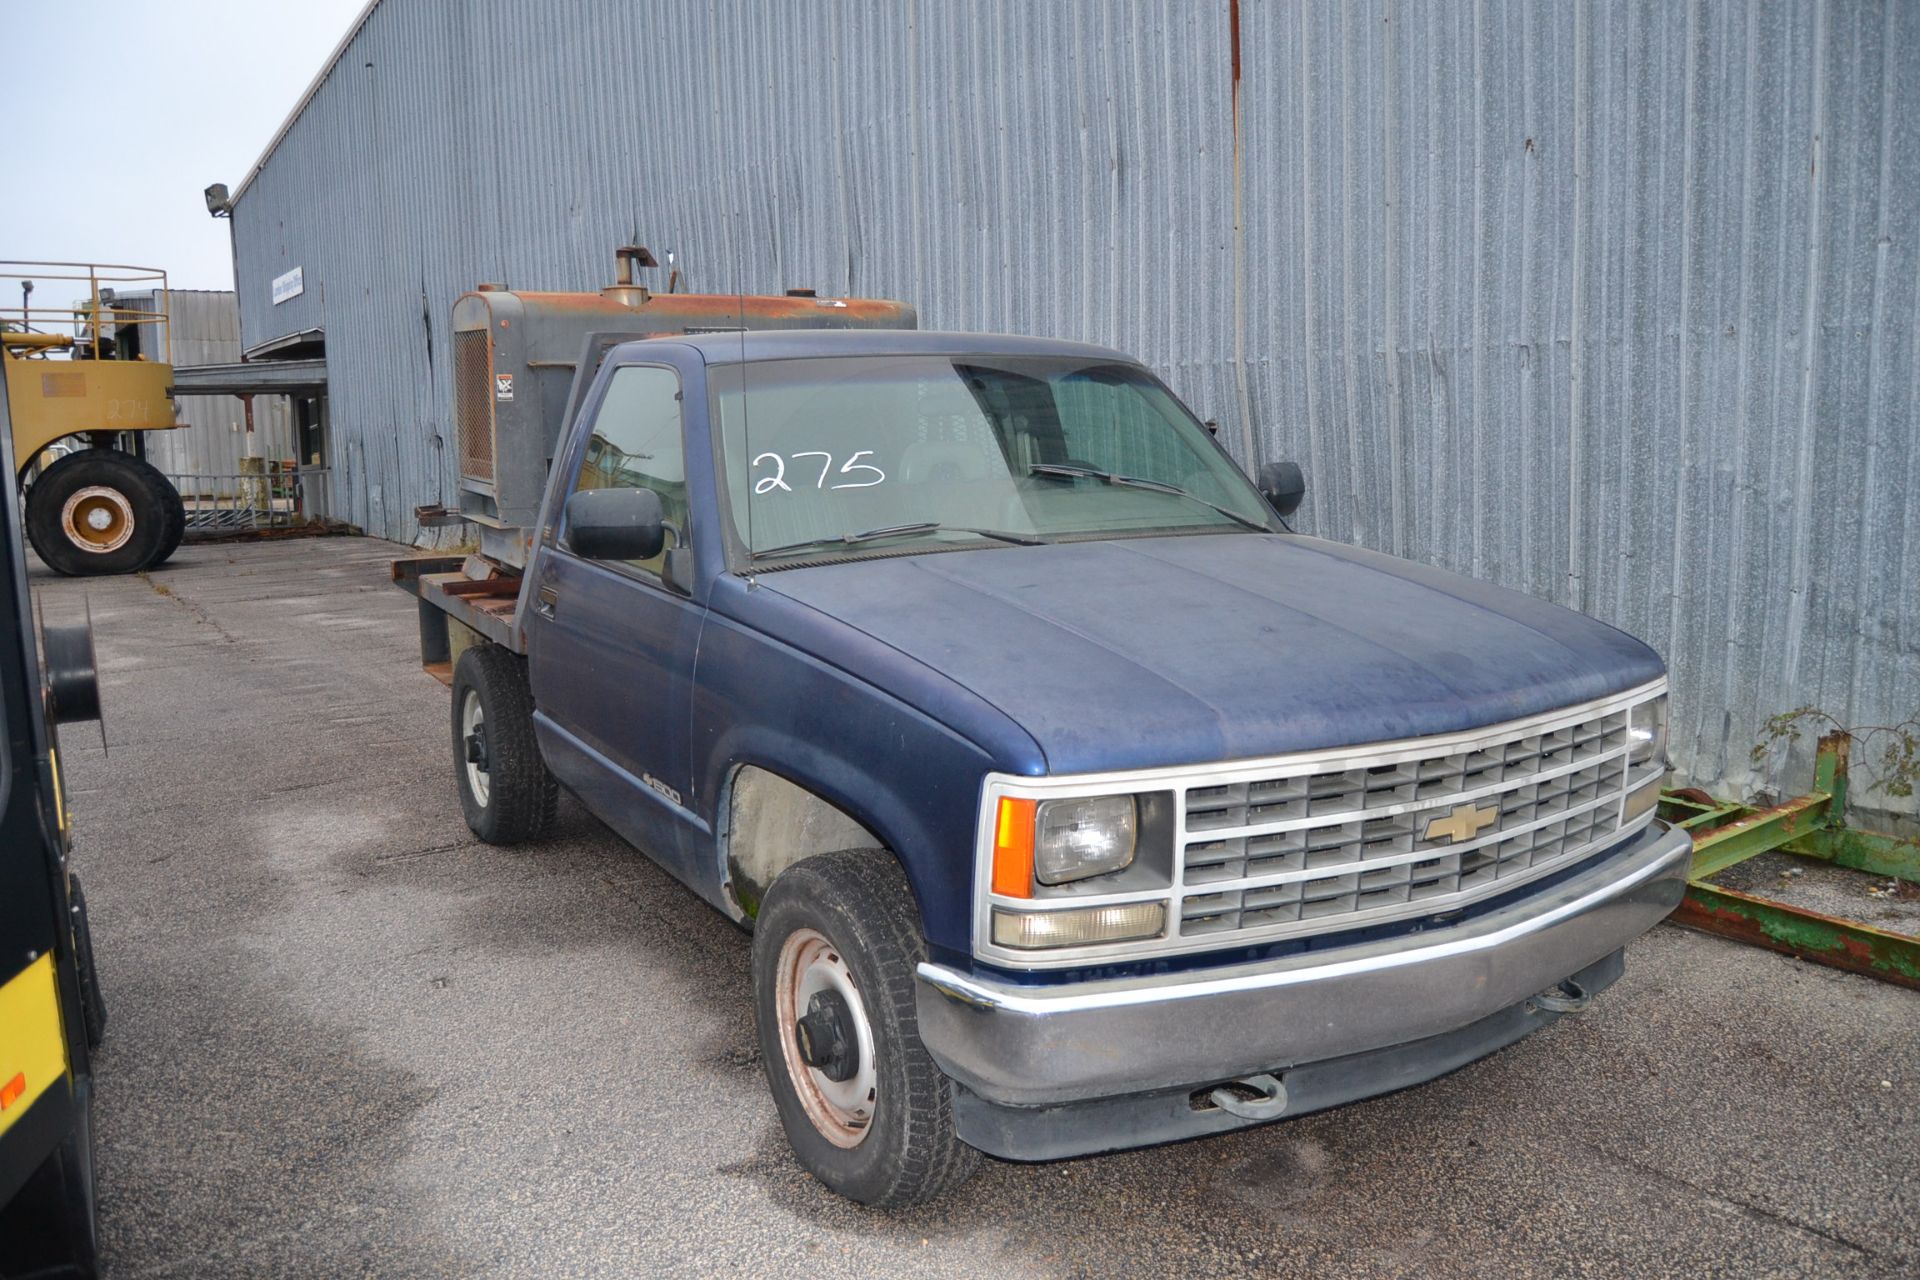 1993 CHEVROLET 1500 GAS ENGINE TRUCK 4 X 4 W/ AUTO TRANSMISSION NO TITLE NEEDS REPAIR W/ LINCOLN